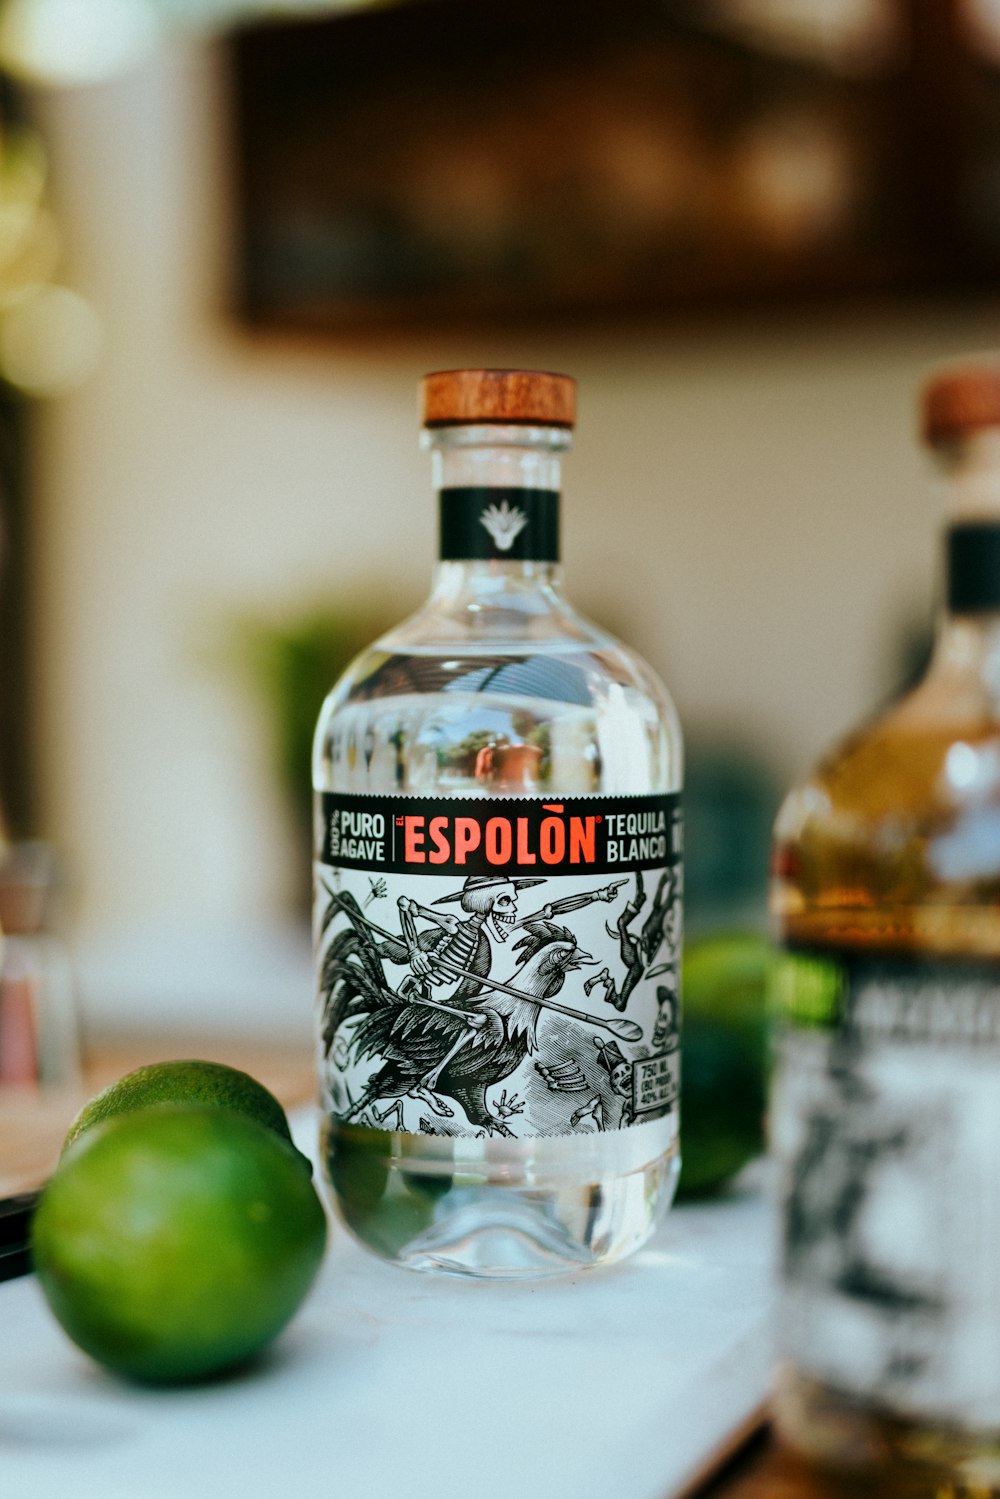 Espolòn Tequila bottle with limes